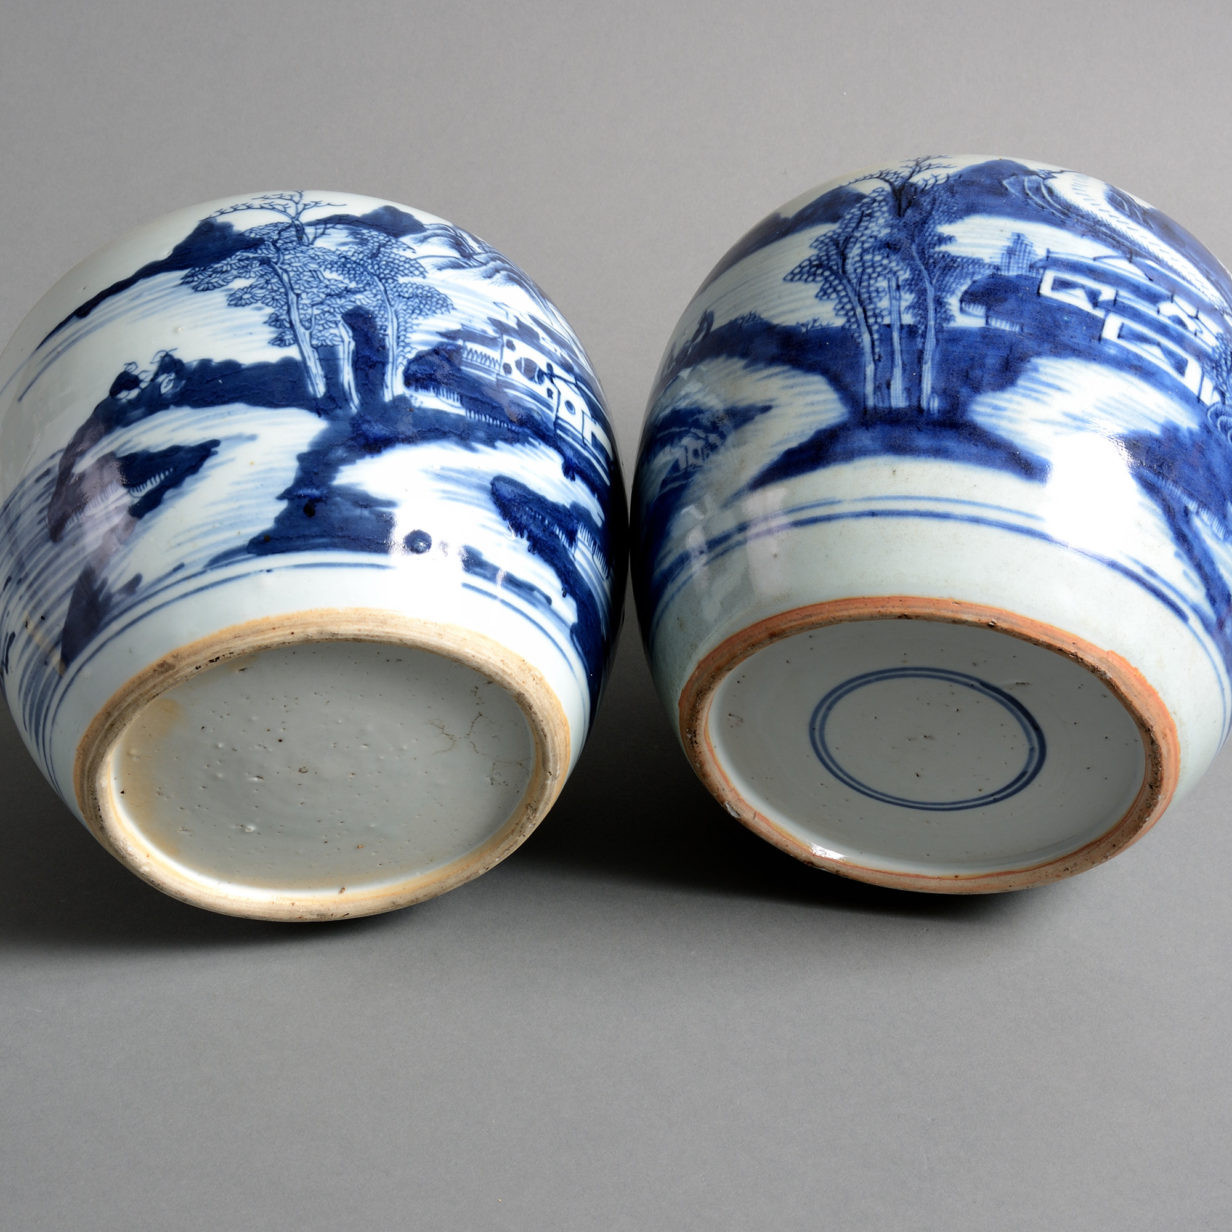 A pair of late 18th century qing dynasty blue & white porcelain jars